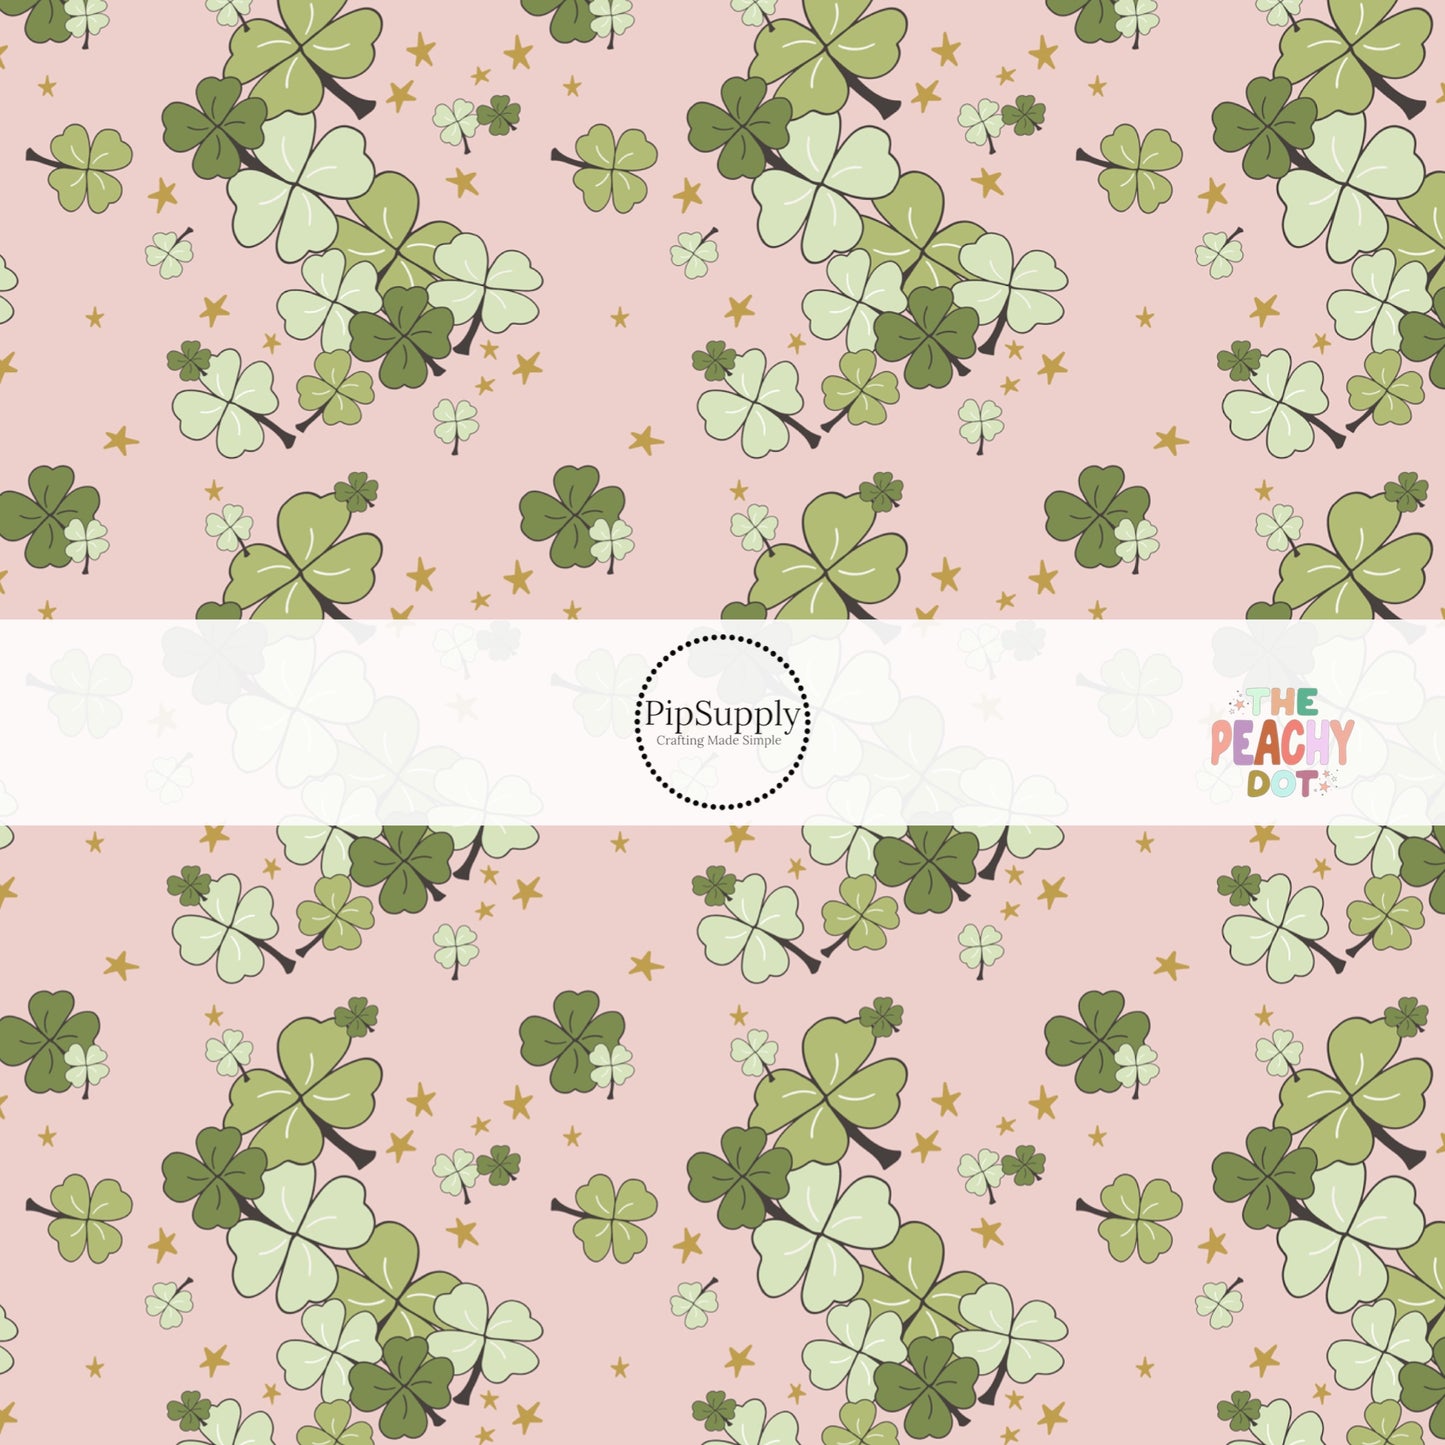 Light Pink Fabric By the Yard with green clovers and gold scattered stars